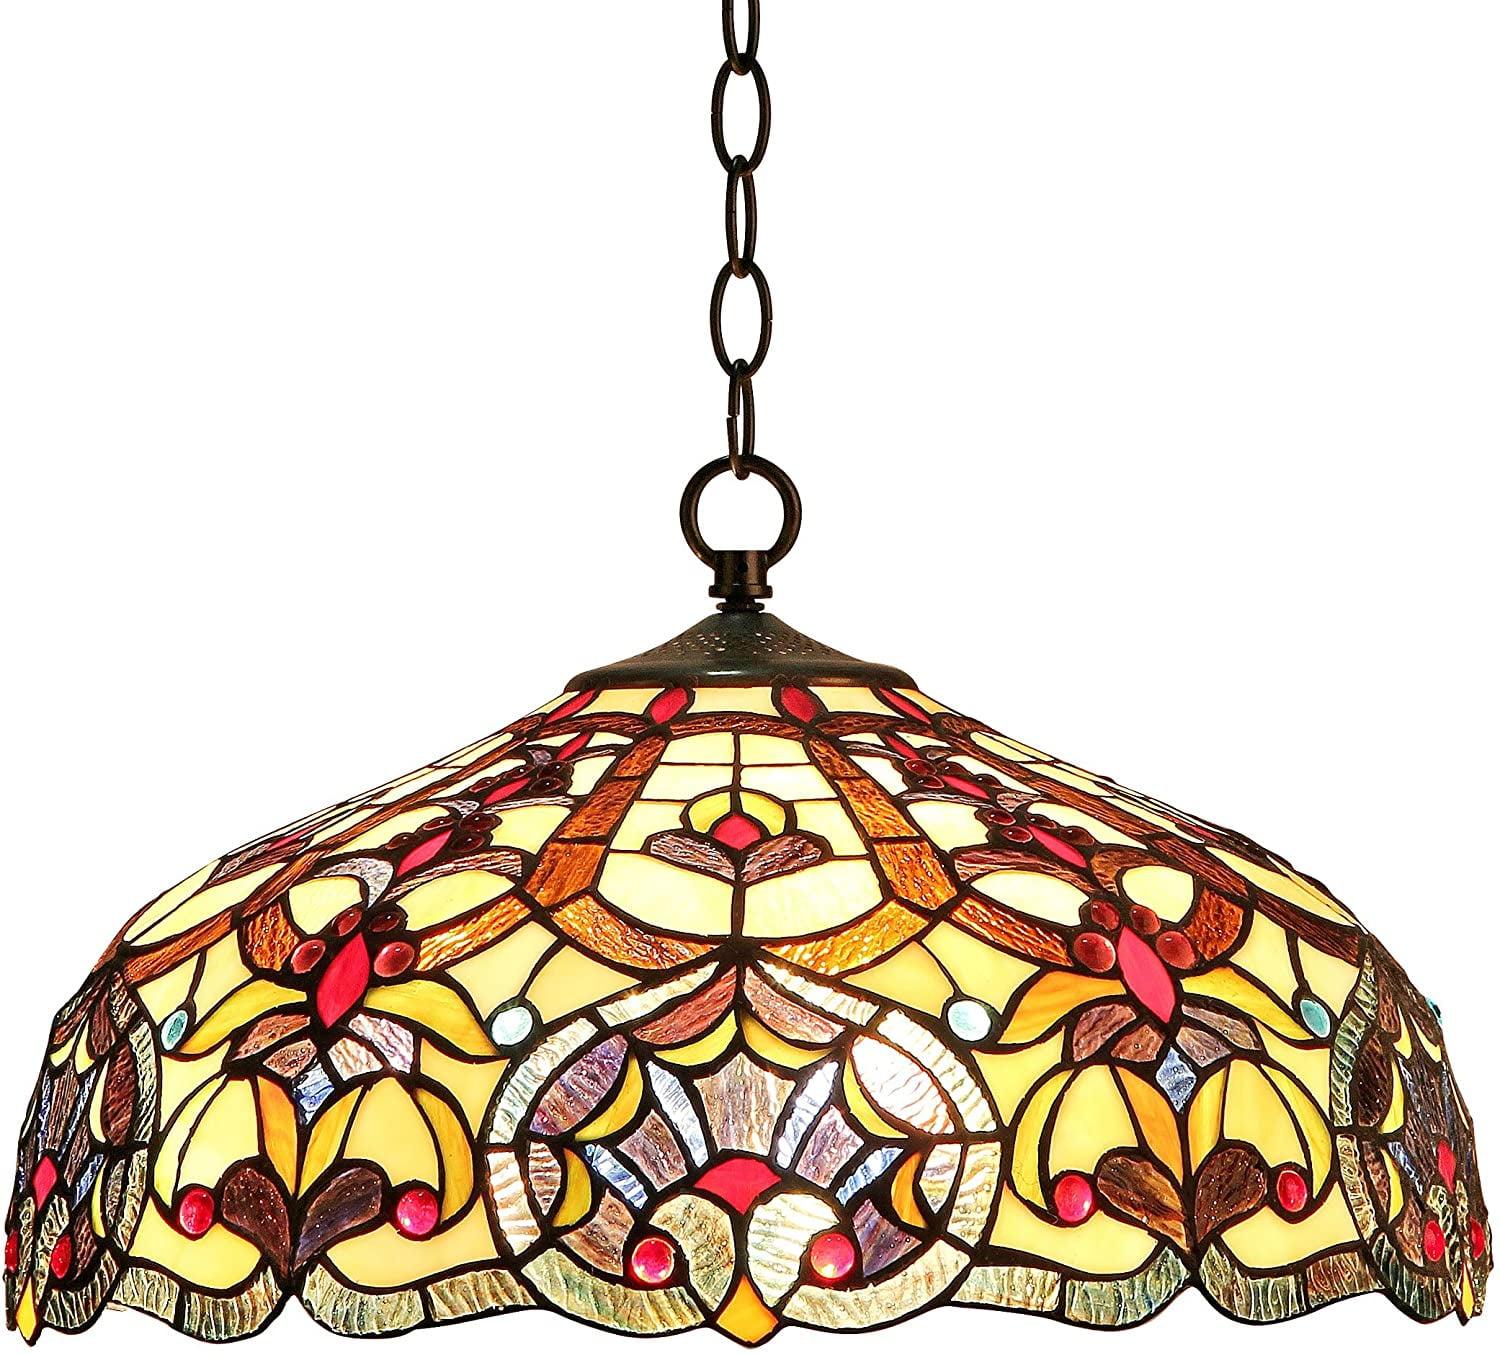 Sadie Victorian 18" Bronze and Glass Ceiling Pendant Light